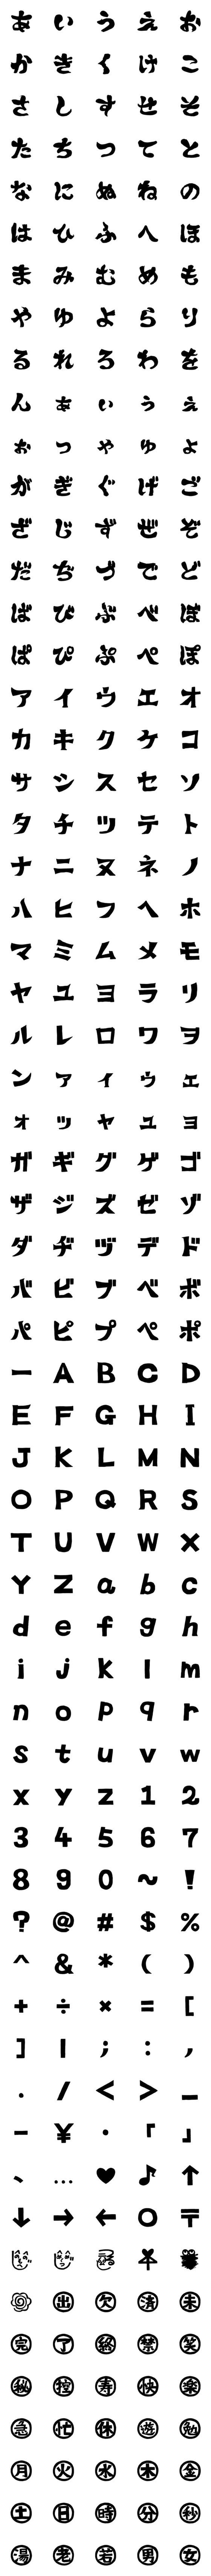 [LINE絵文字]モノクロでハンコっぽいデコ文字＆絵文字の画像一覧